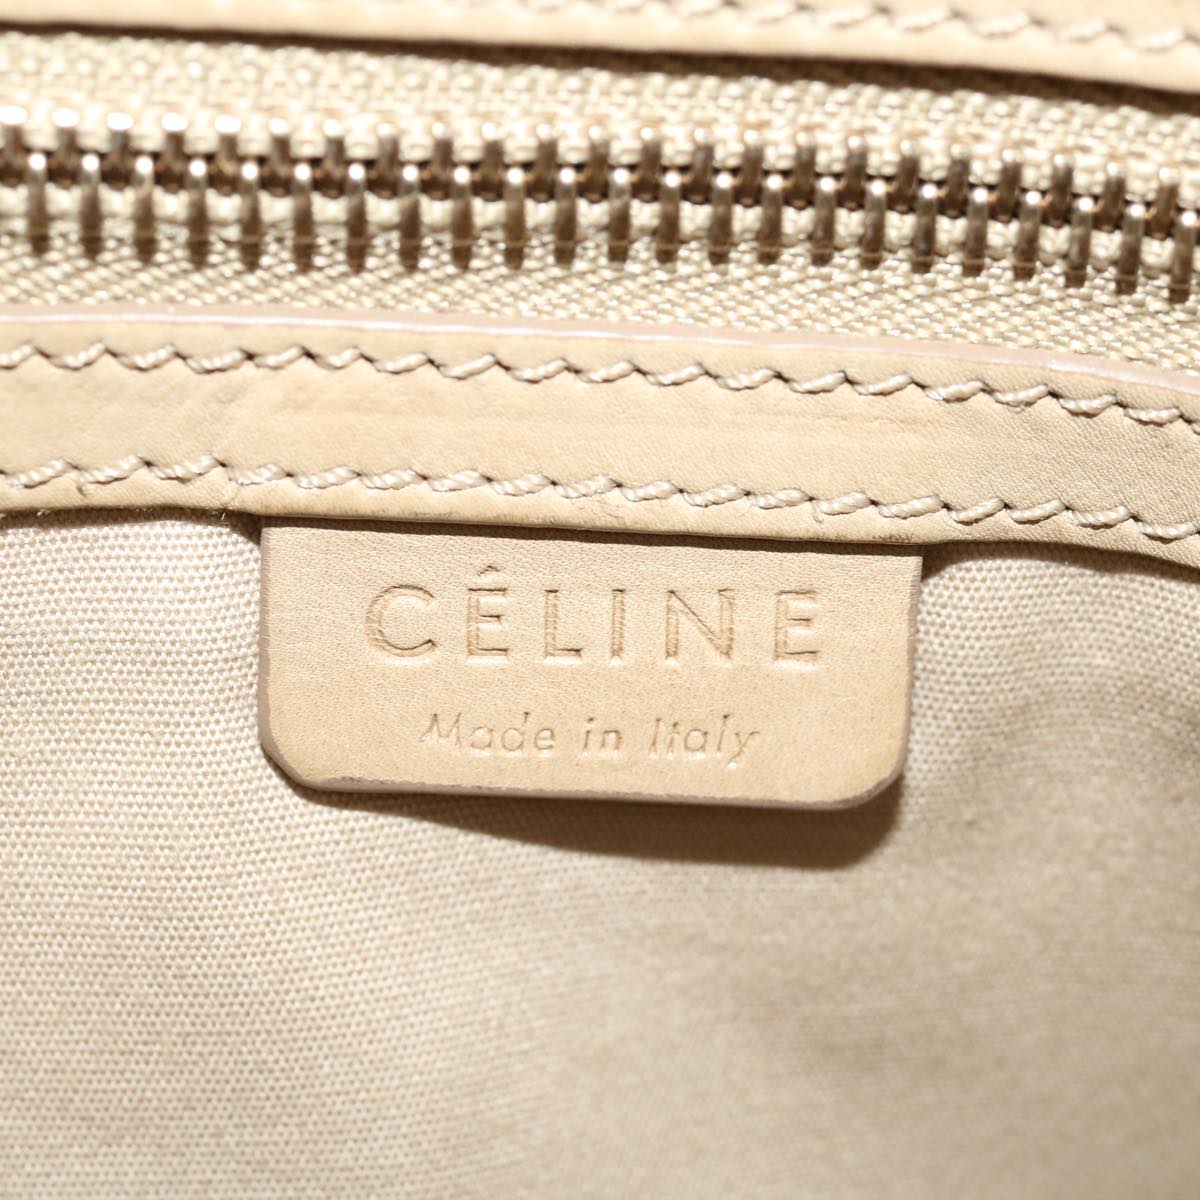 CELINE Hand Bag Leather Beige Auth bs13273